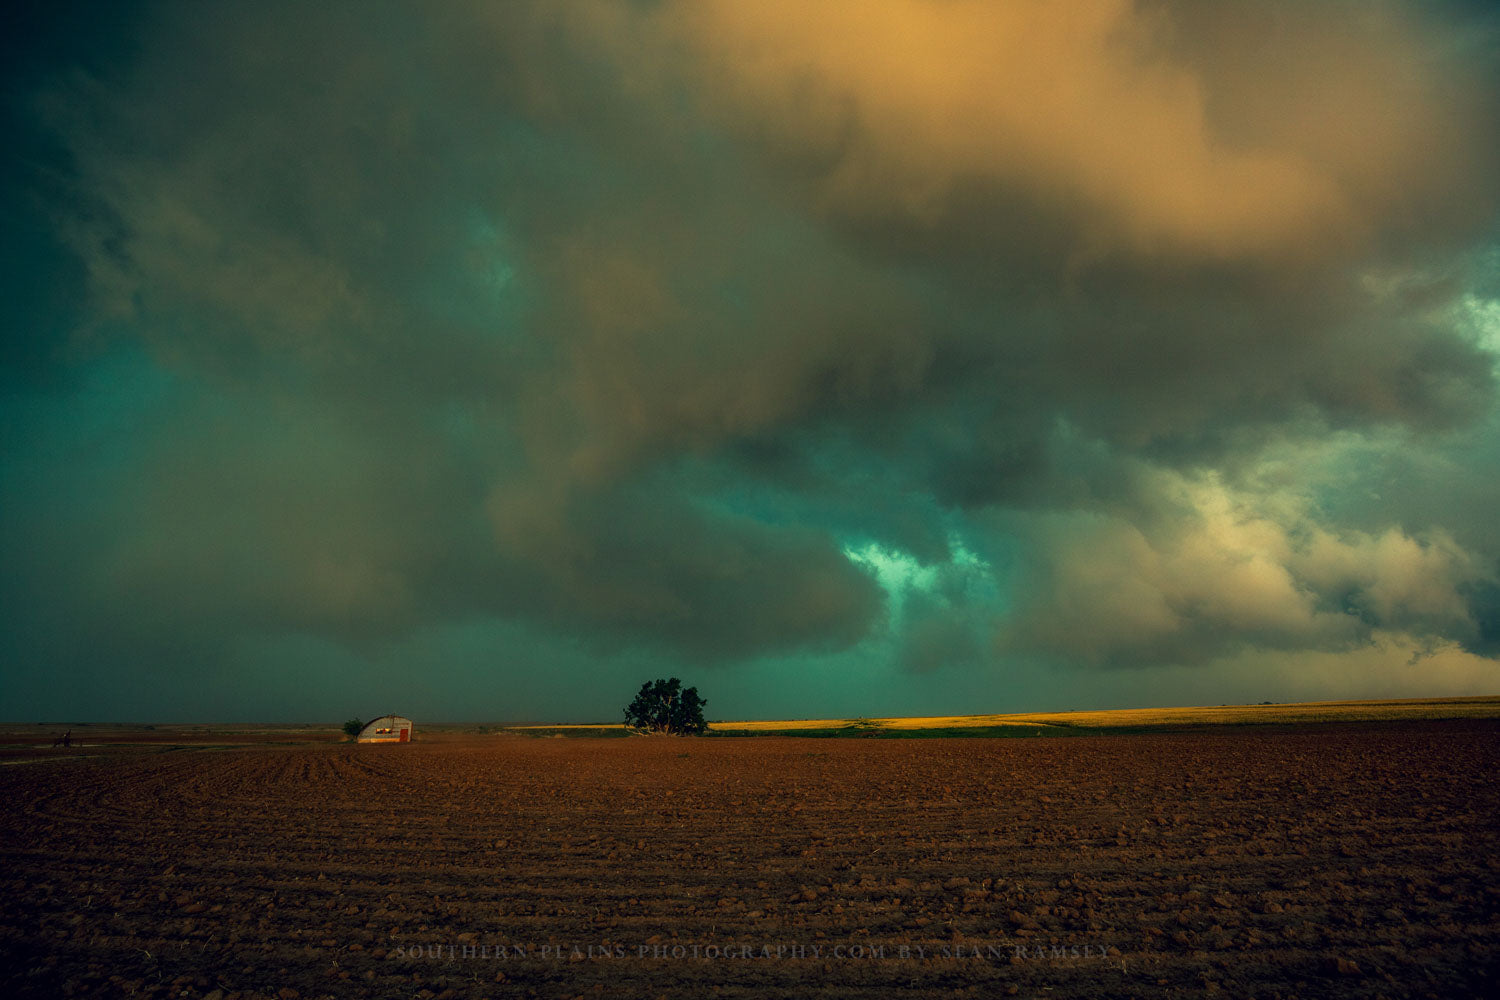 Nostalgic photography print of storm clouds over a field on a farm in Oklahoma by Sean Ramsey of Southern Plains Photography.